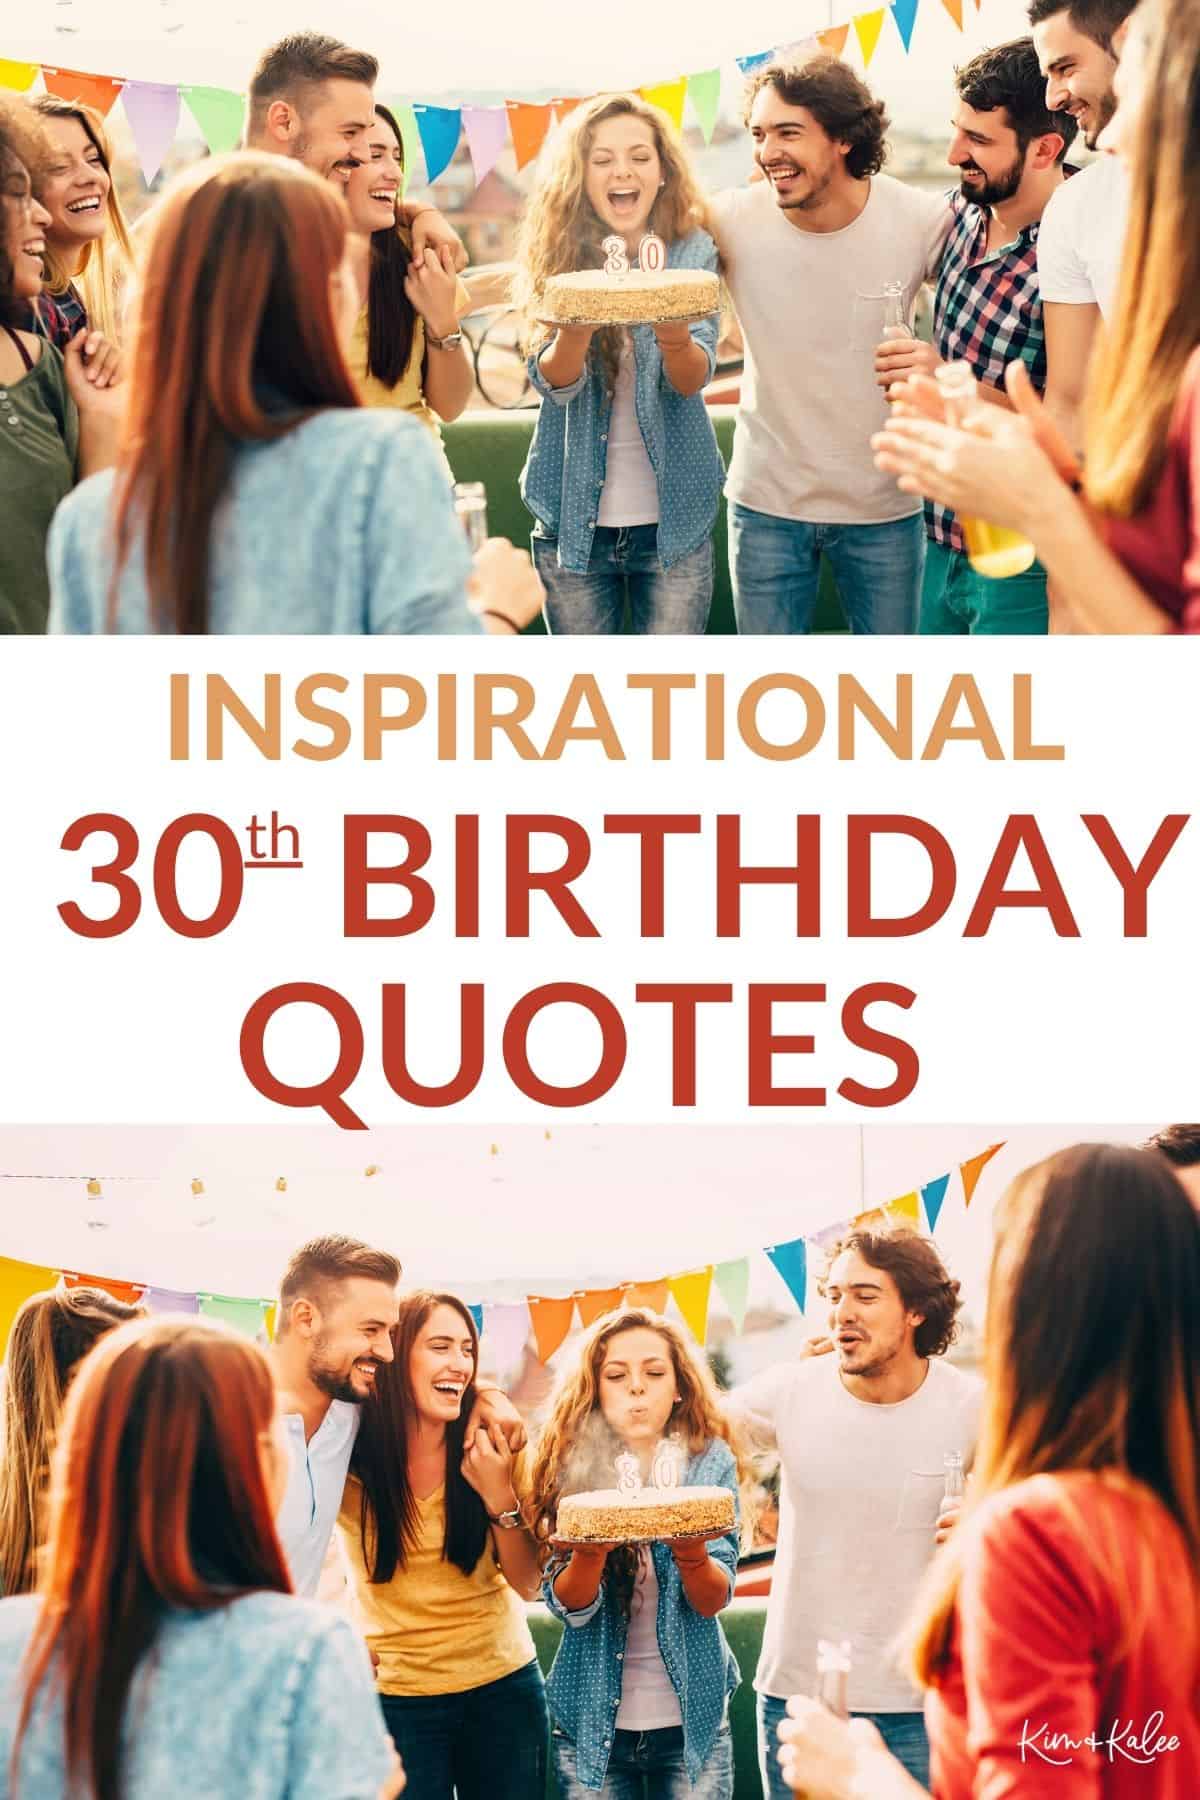 Top 50 Inspirational 30th Birthday Quotes for Her